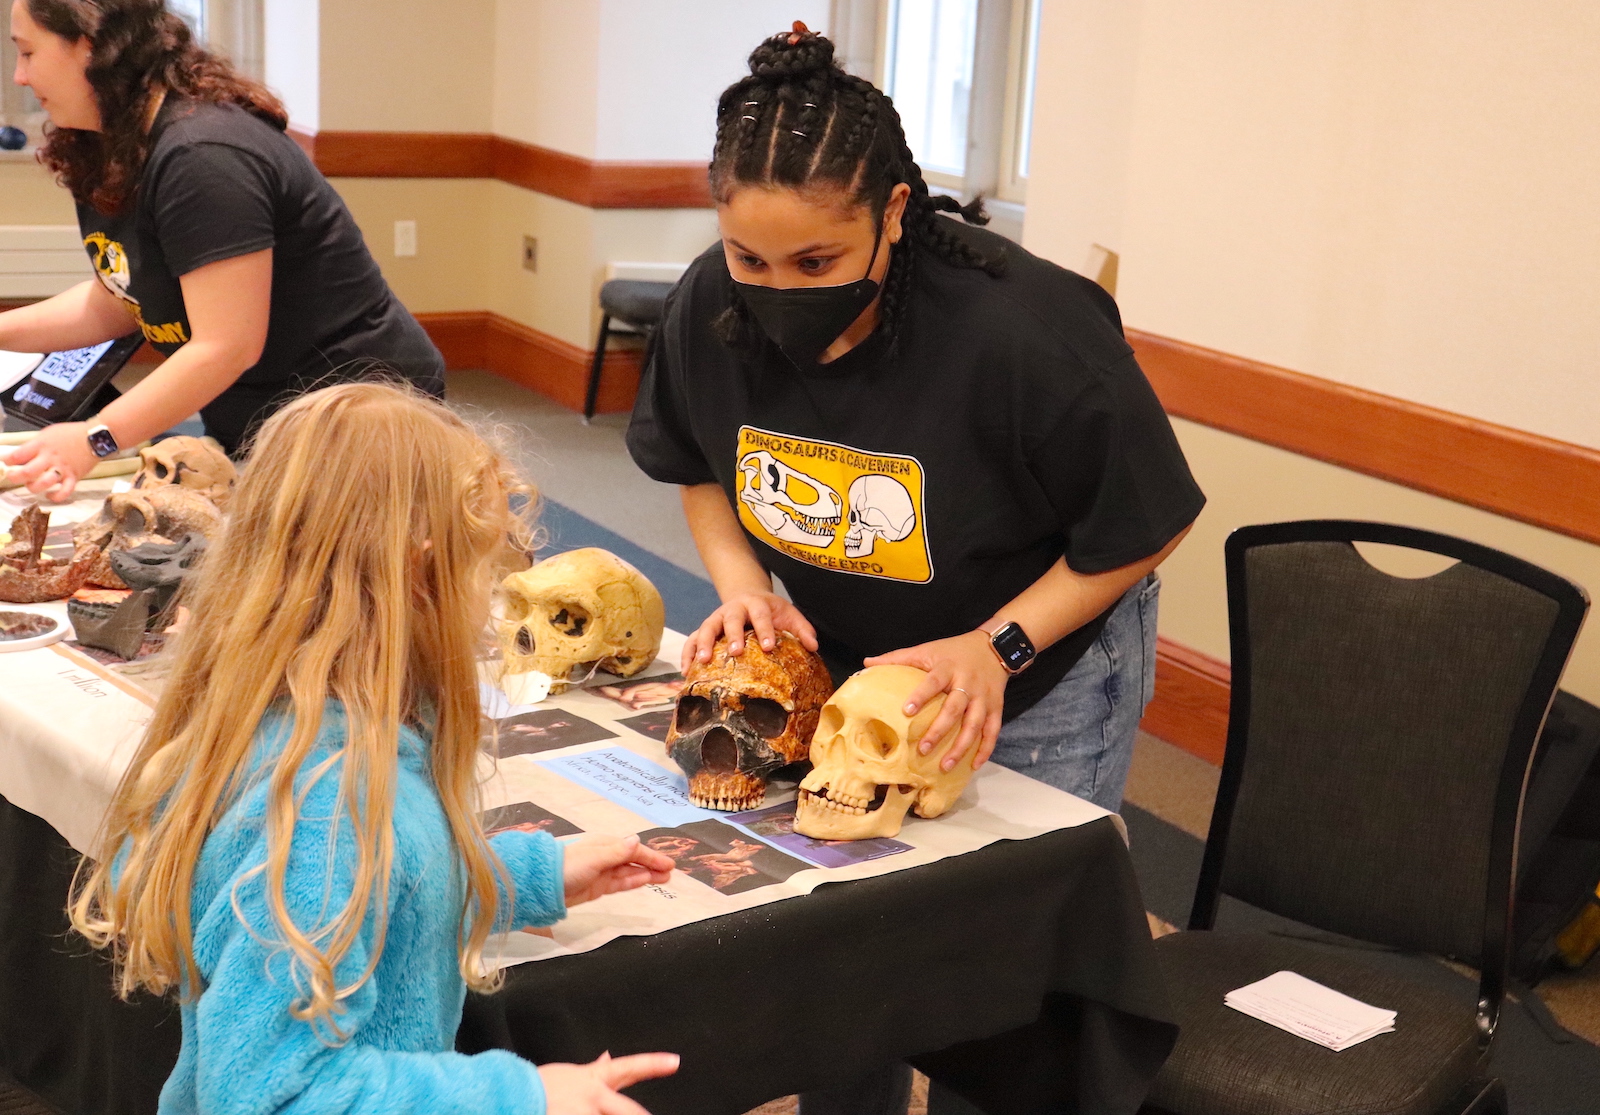 About 600 children and their parents explored University of Missouri science, technology, engineering and math research and creative activity hands-on during the Columbia Young Scientists Expo. Here, a researcher shows a child a fossilized skull.